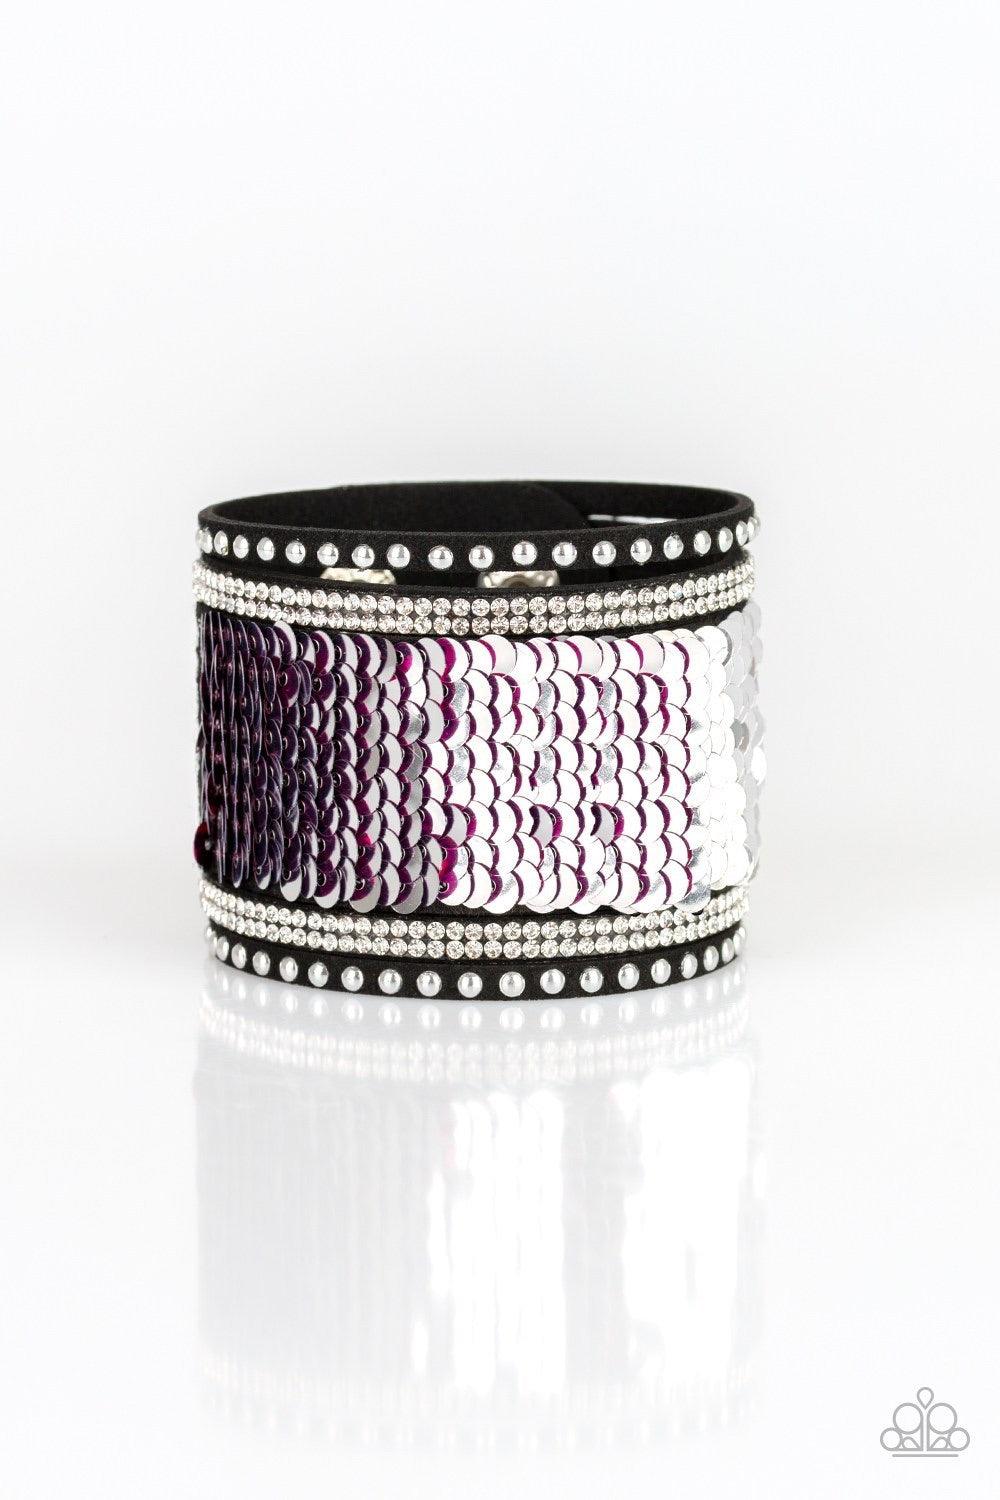 Paparazzi Accessories MERMAIDS Have More Fun - Pink Shiny silver studs, glassy white rhinestones, and shimmering sequins are sprinkled across a thick gray suede band that has been spliced into five glittery rows. Bracelet features reversible sequins that